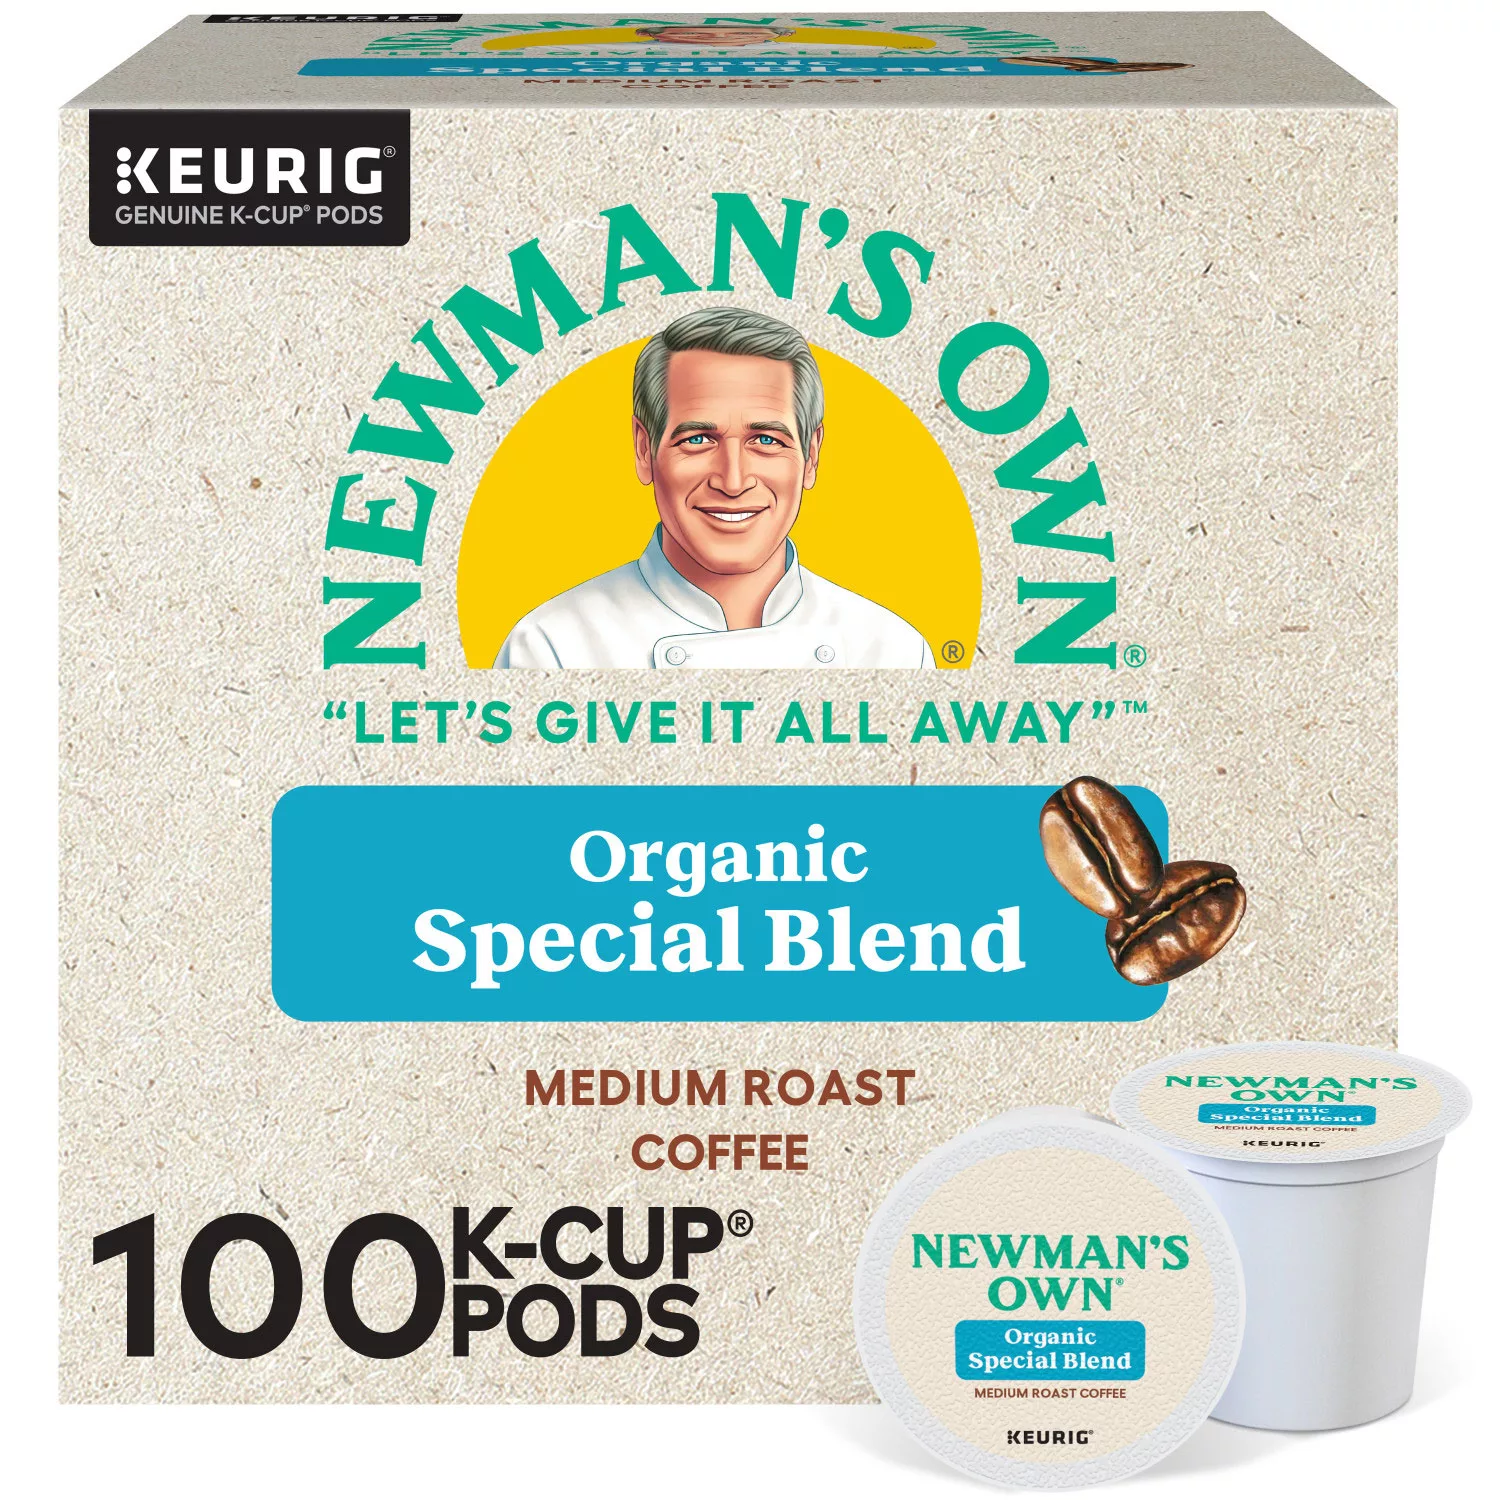 Newman's Own Organics Special Blend Coffee K-Cup Pods